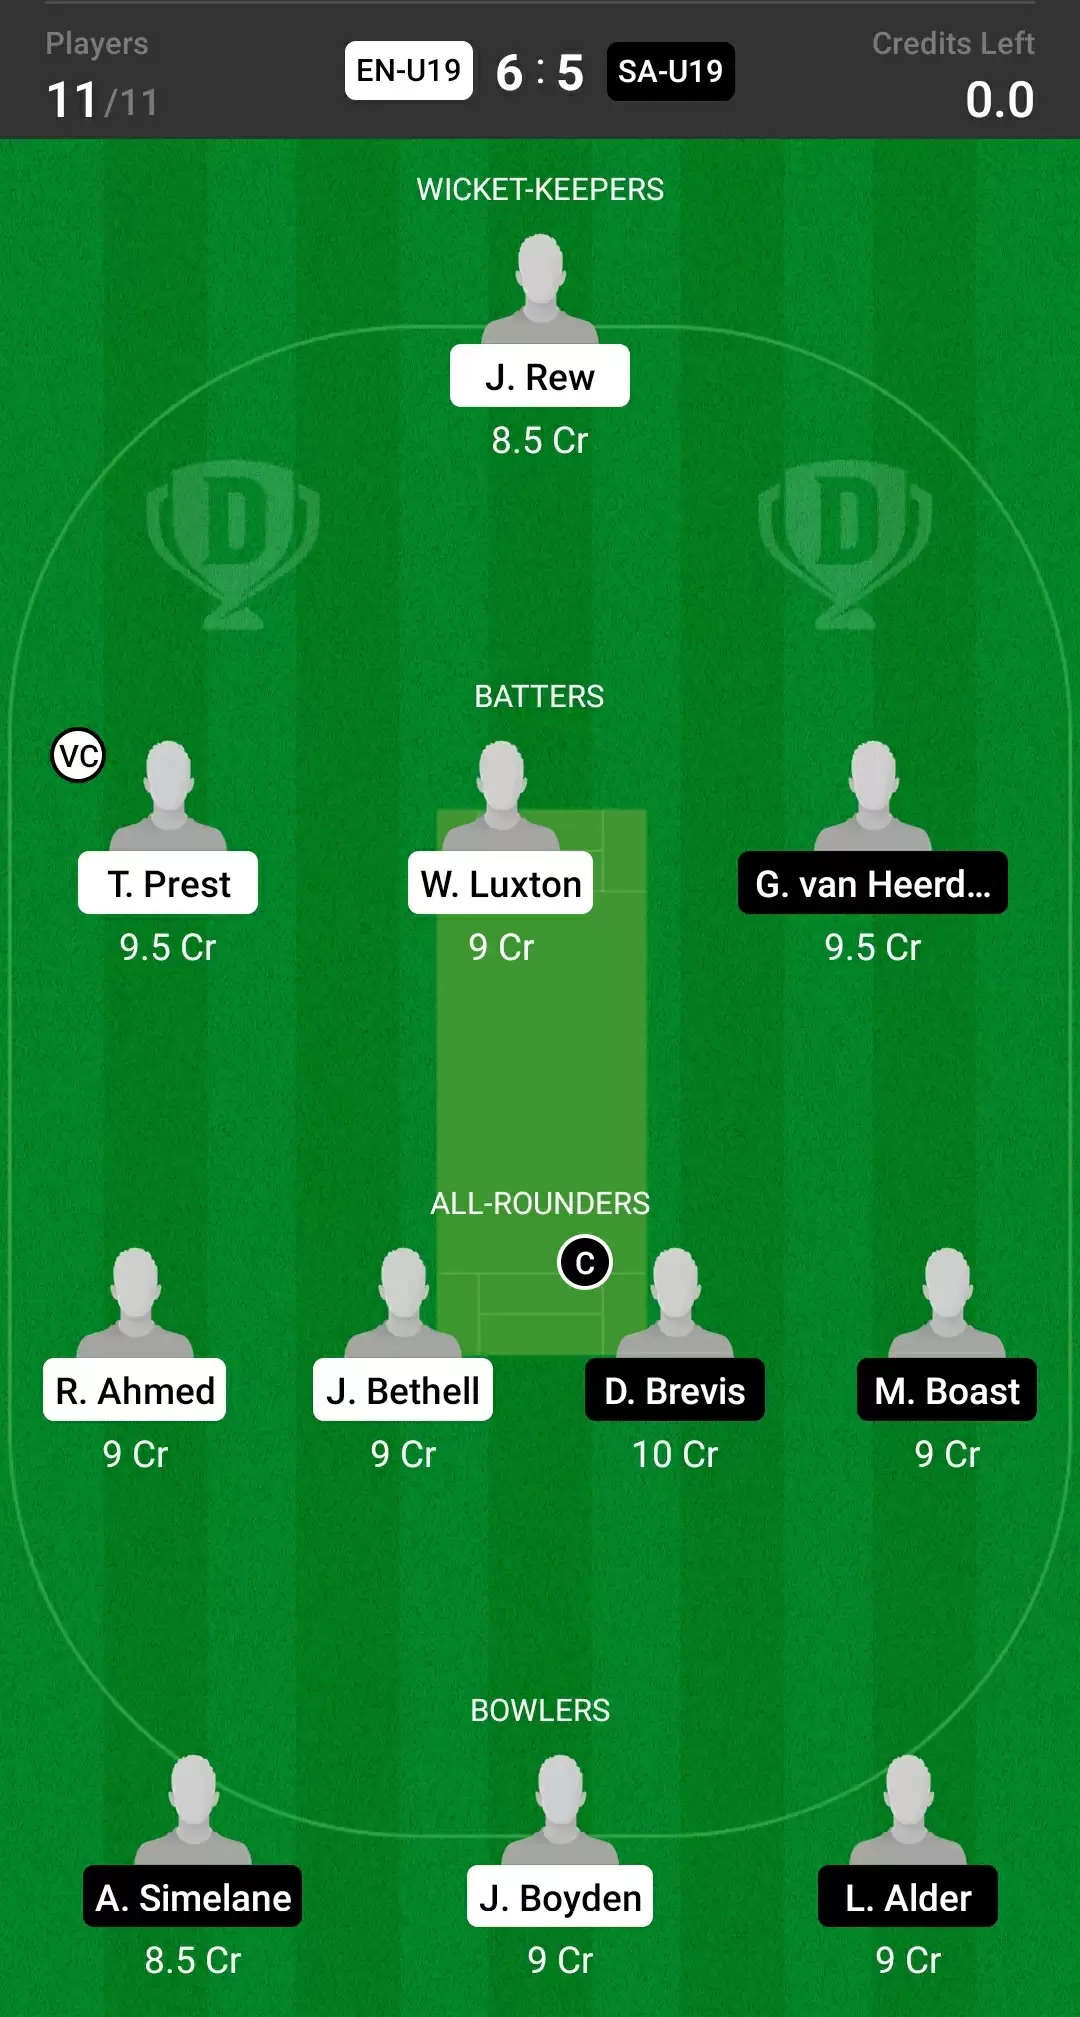 EN-U19 Vs SA-U19 Dream11 Prediction For U19 World Cup 2022: Playing XI, Fantasy Cricket Tips, Team, Weather Updates And Pitch Report